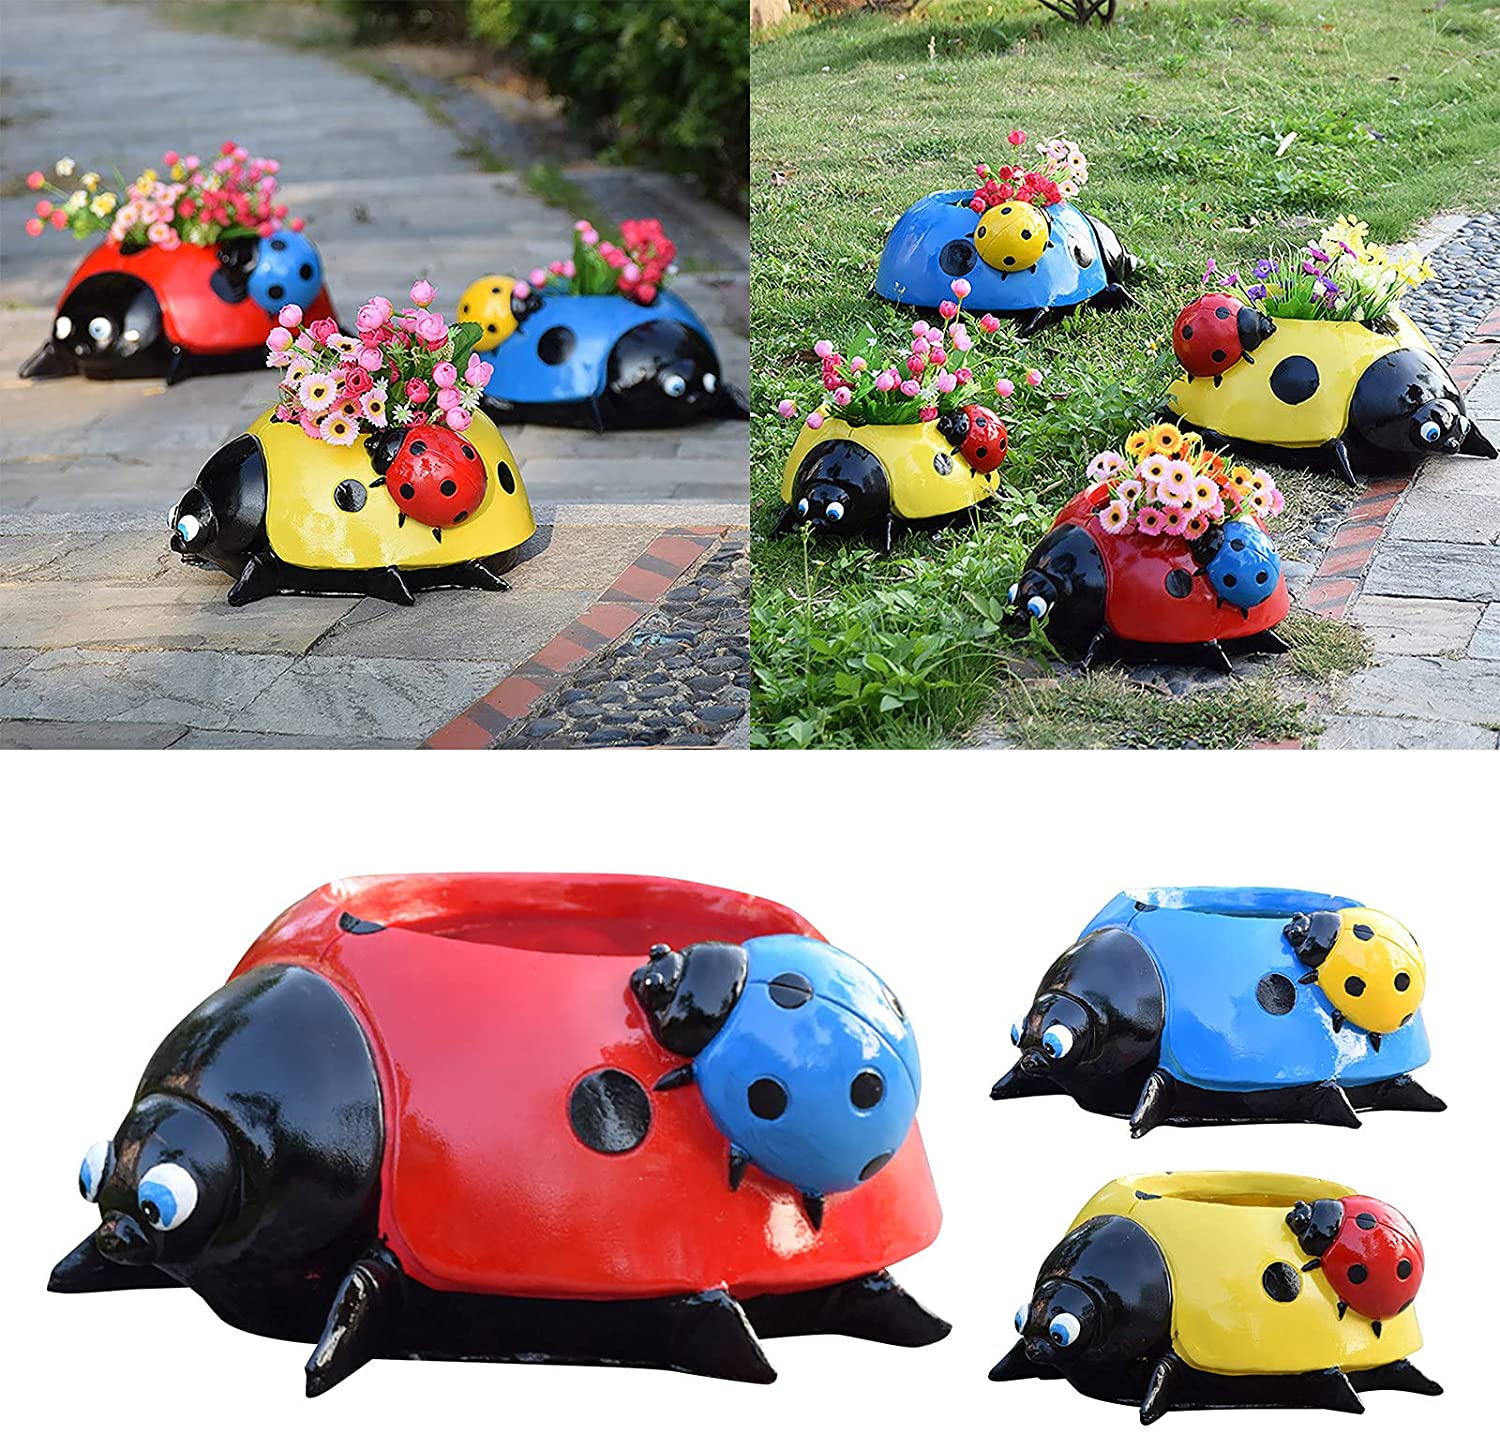 Resin Ladybugs Flower Pot Garden Decorations, Simulation Animal Ladybugs Flower Pot,Outdoor and Garden Decor Patio Yard Planter Flower Pot Indoor or Outdoor Decorations (Red) - image 1 of 7